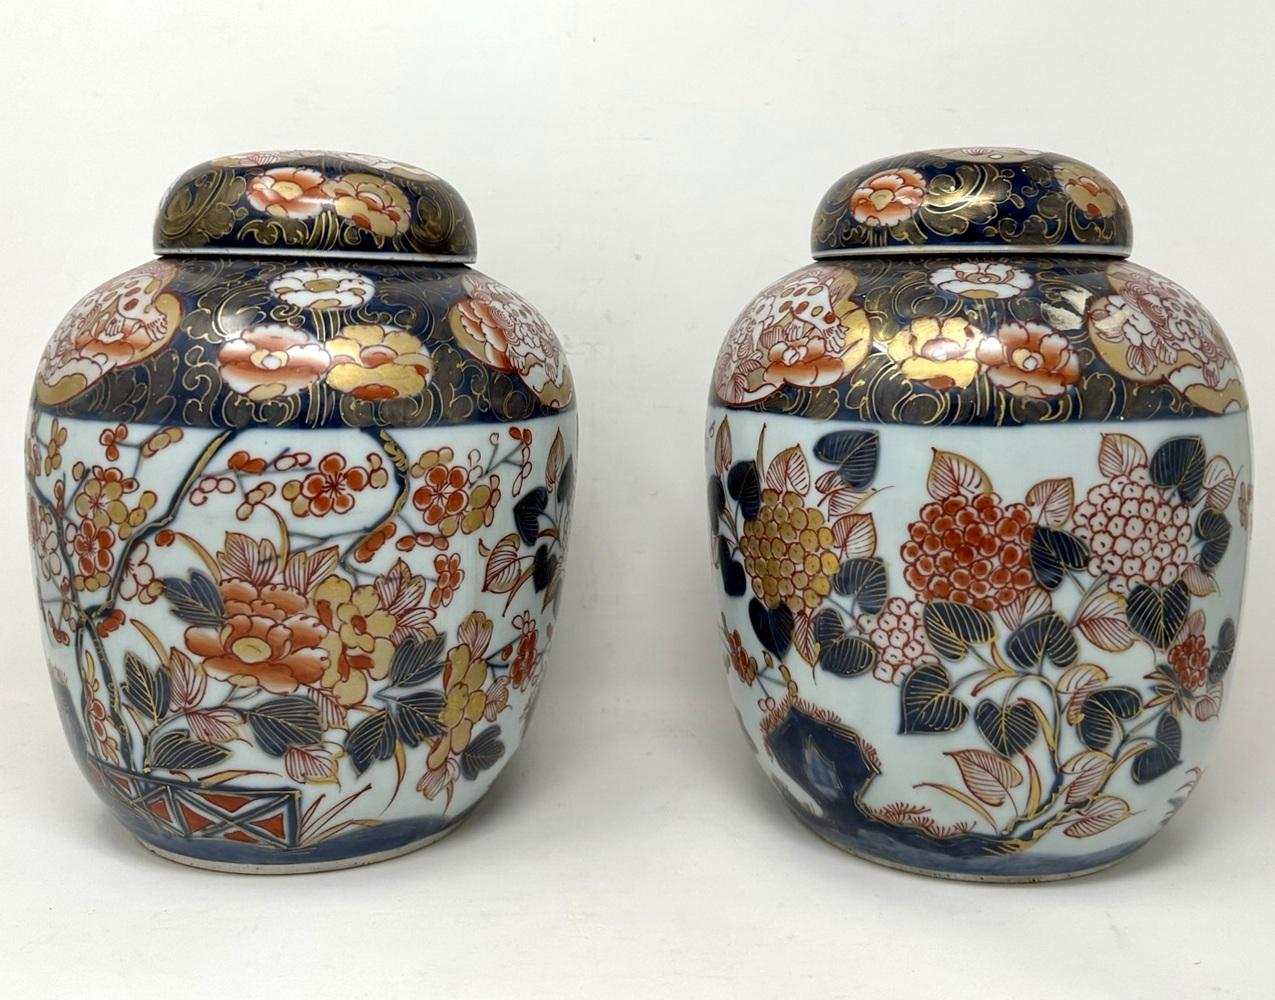 Stunning Pair of large early Meiji period Imari heavy gauge earthenware Rouleau Japanese Ginger Jar Vases of generous size. These beautiful hand decorated heavy gauge-ware vases were made during the Meiji period (1868-1912), in this distinctive and